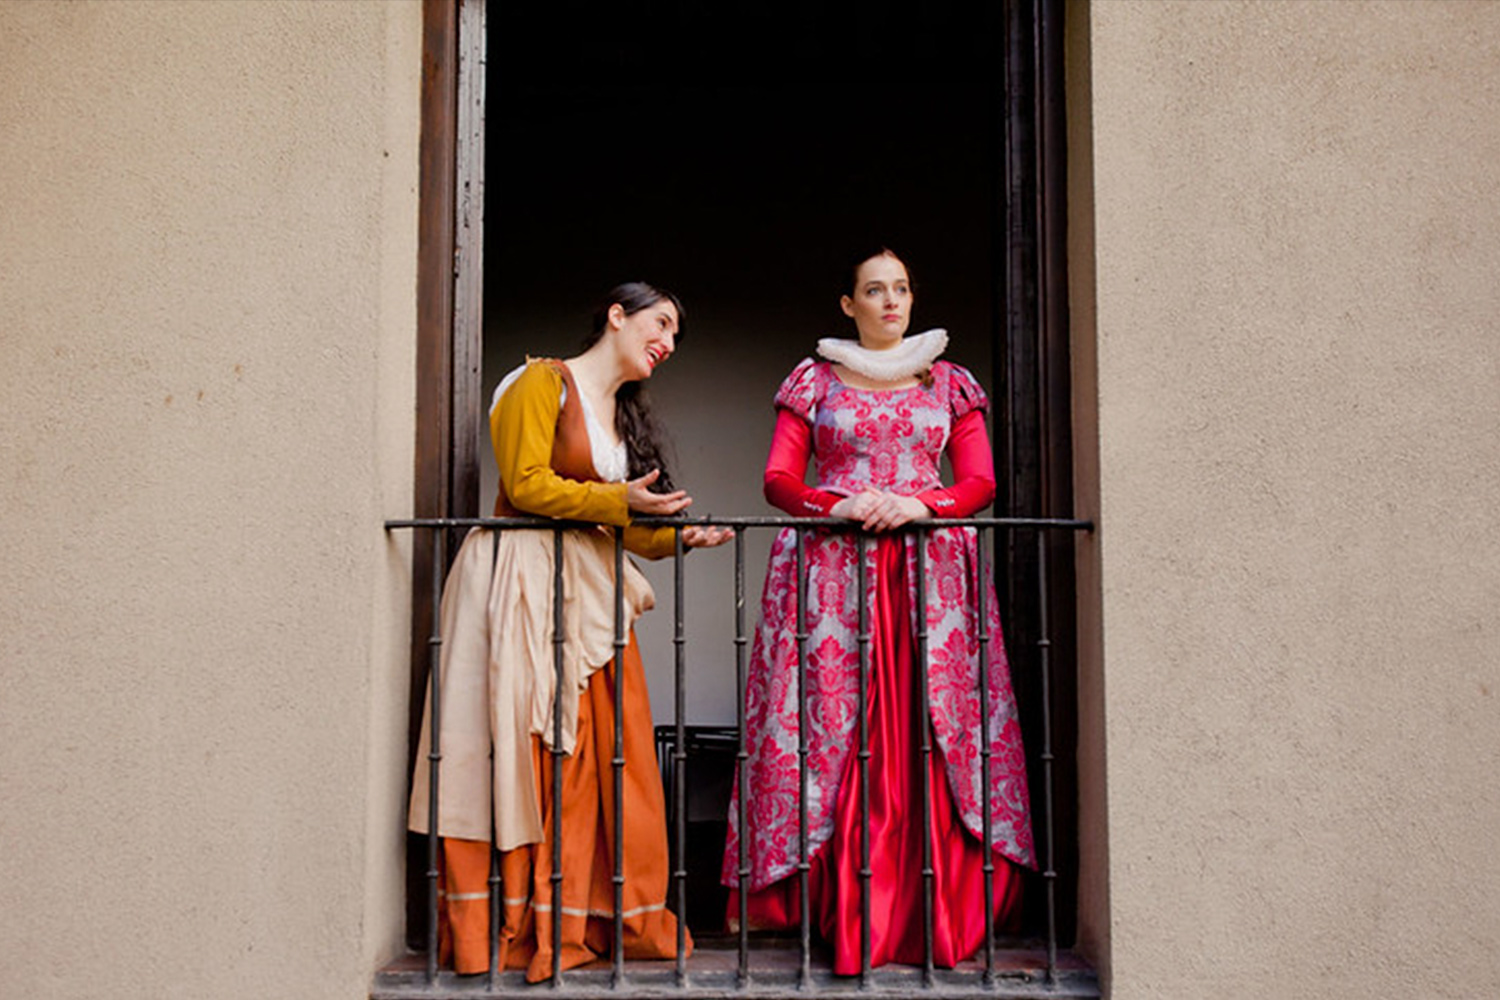 Dramatized route "Letters and Swords": this fall revive the Spanish Golden Age in Madrid